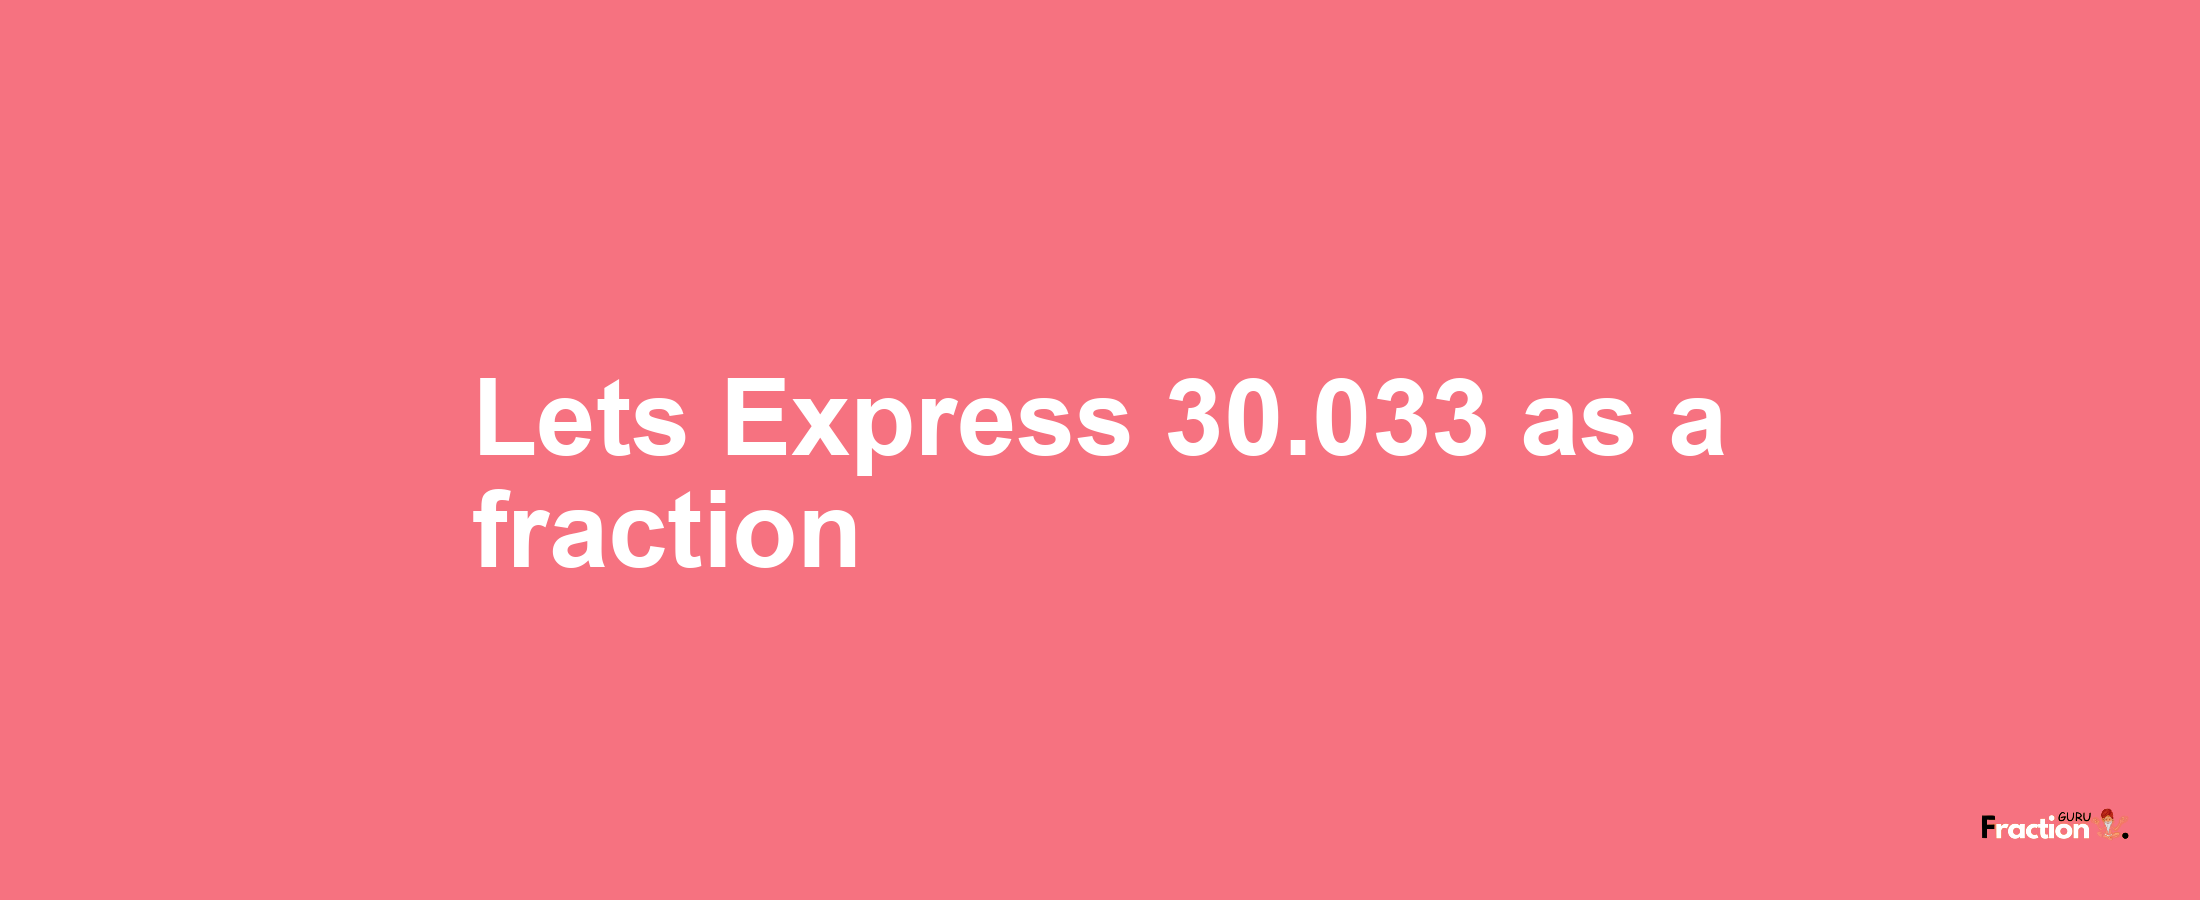 Lets Express 30.033 as afraction